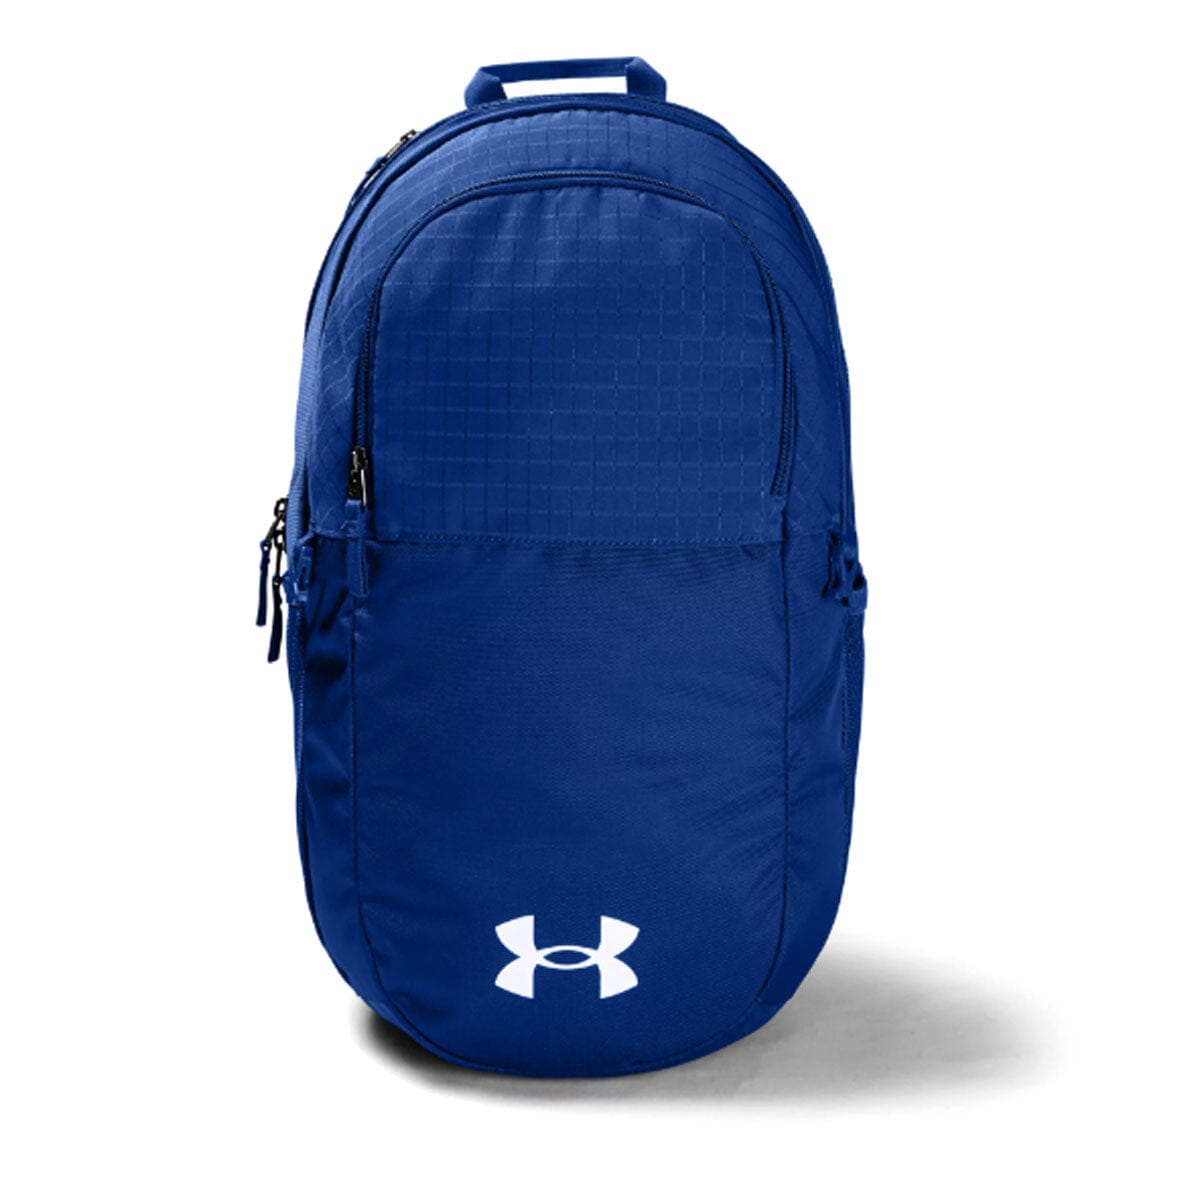 Under Armour Hustle Sport Backpack - Red, OSFA